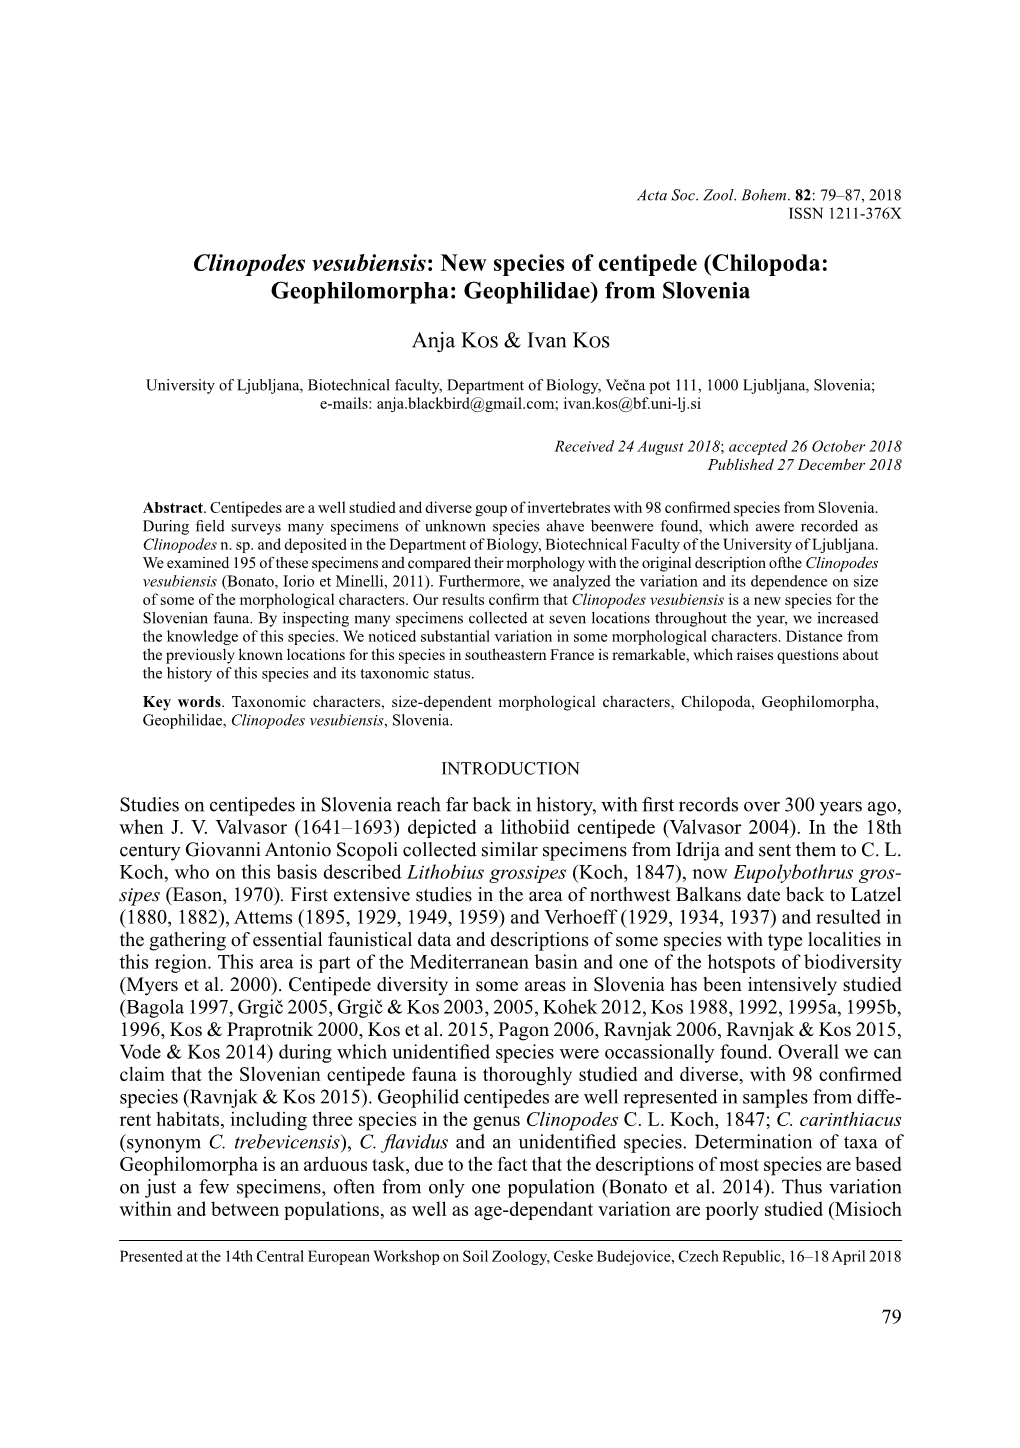 Clinopodes Vesubiensis: New Species of Centipede (Chilopoda: Geophilomorpha: Geophilidae) from Slovenia